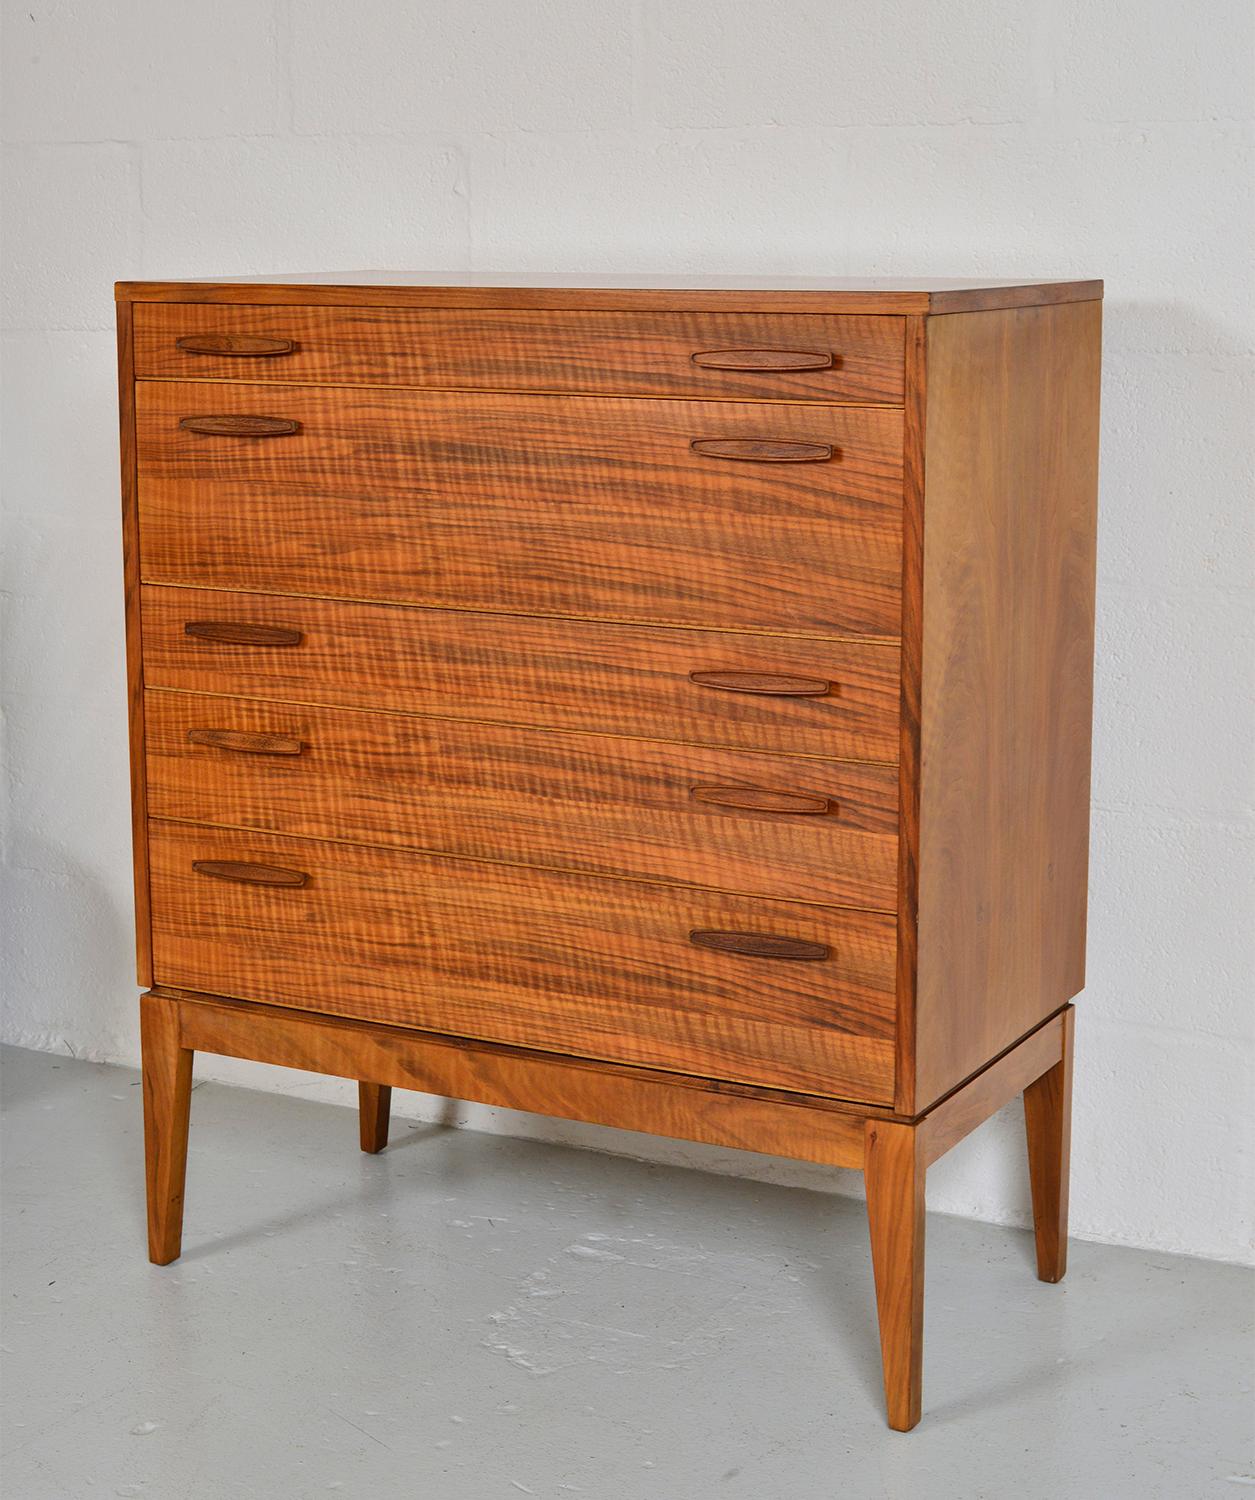 Stunning midcentury chest of drawers in well-figured walnut by renowned British furniture maker, Alfred Cox, supplier to Heals of London. The chest of drawers stands on gently tapered legs, with five dovetailed drawers, of various depths. The